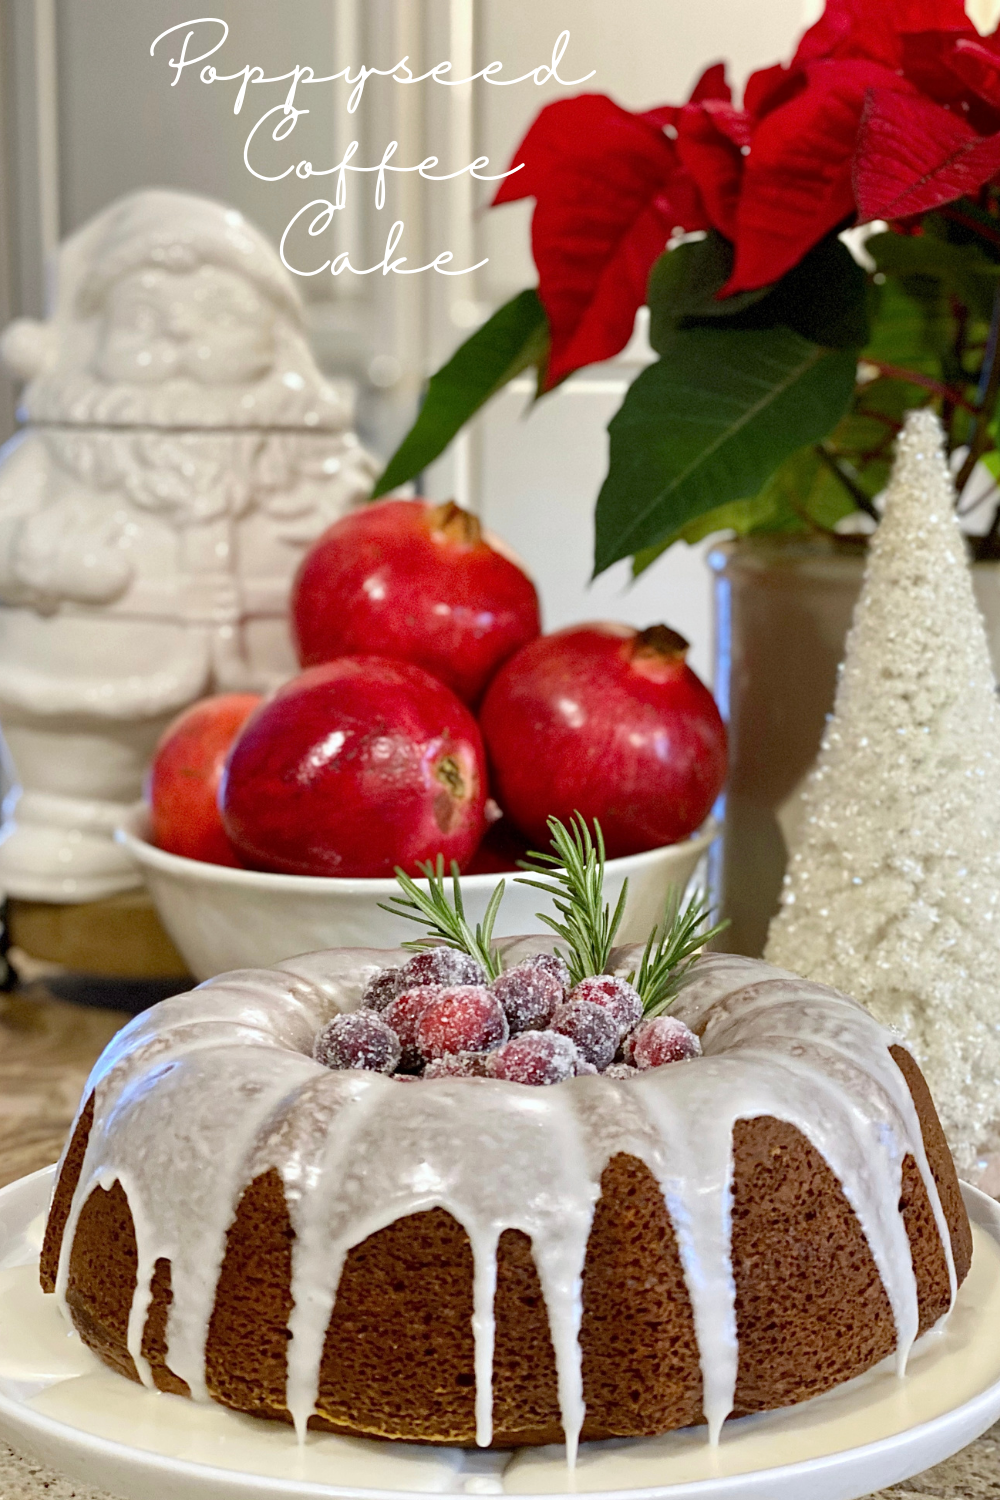 Poppyseed Coffee Cake displayed with Santa cookie jar, a bowl of pomegranates, and a poinsettia behind it.